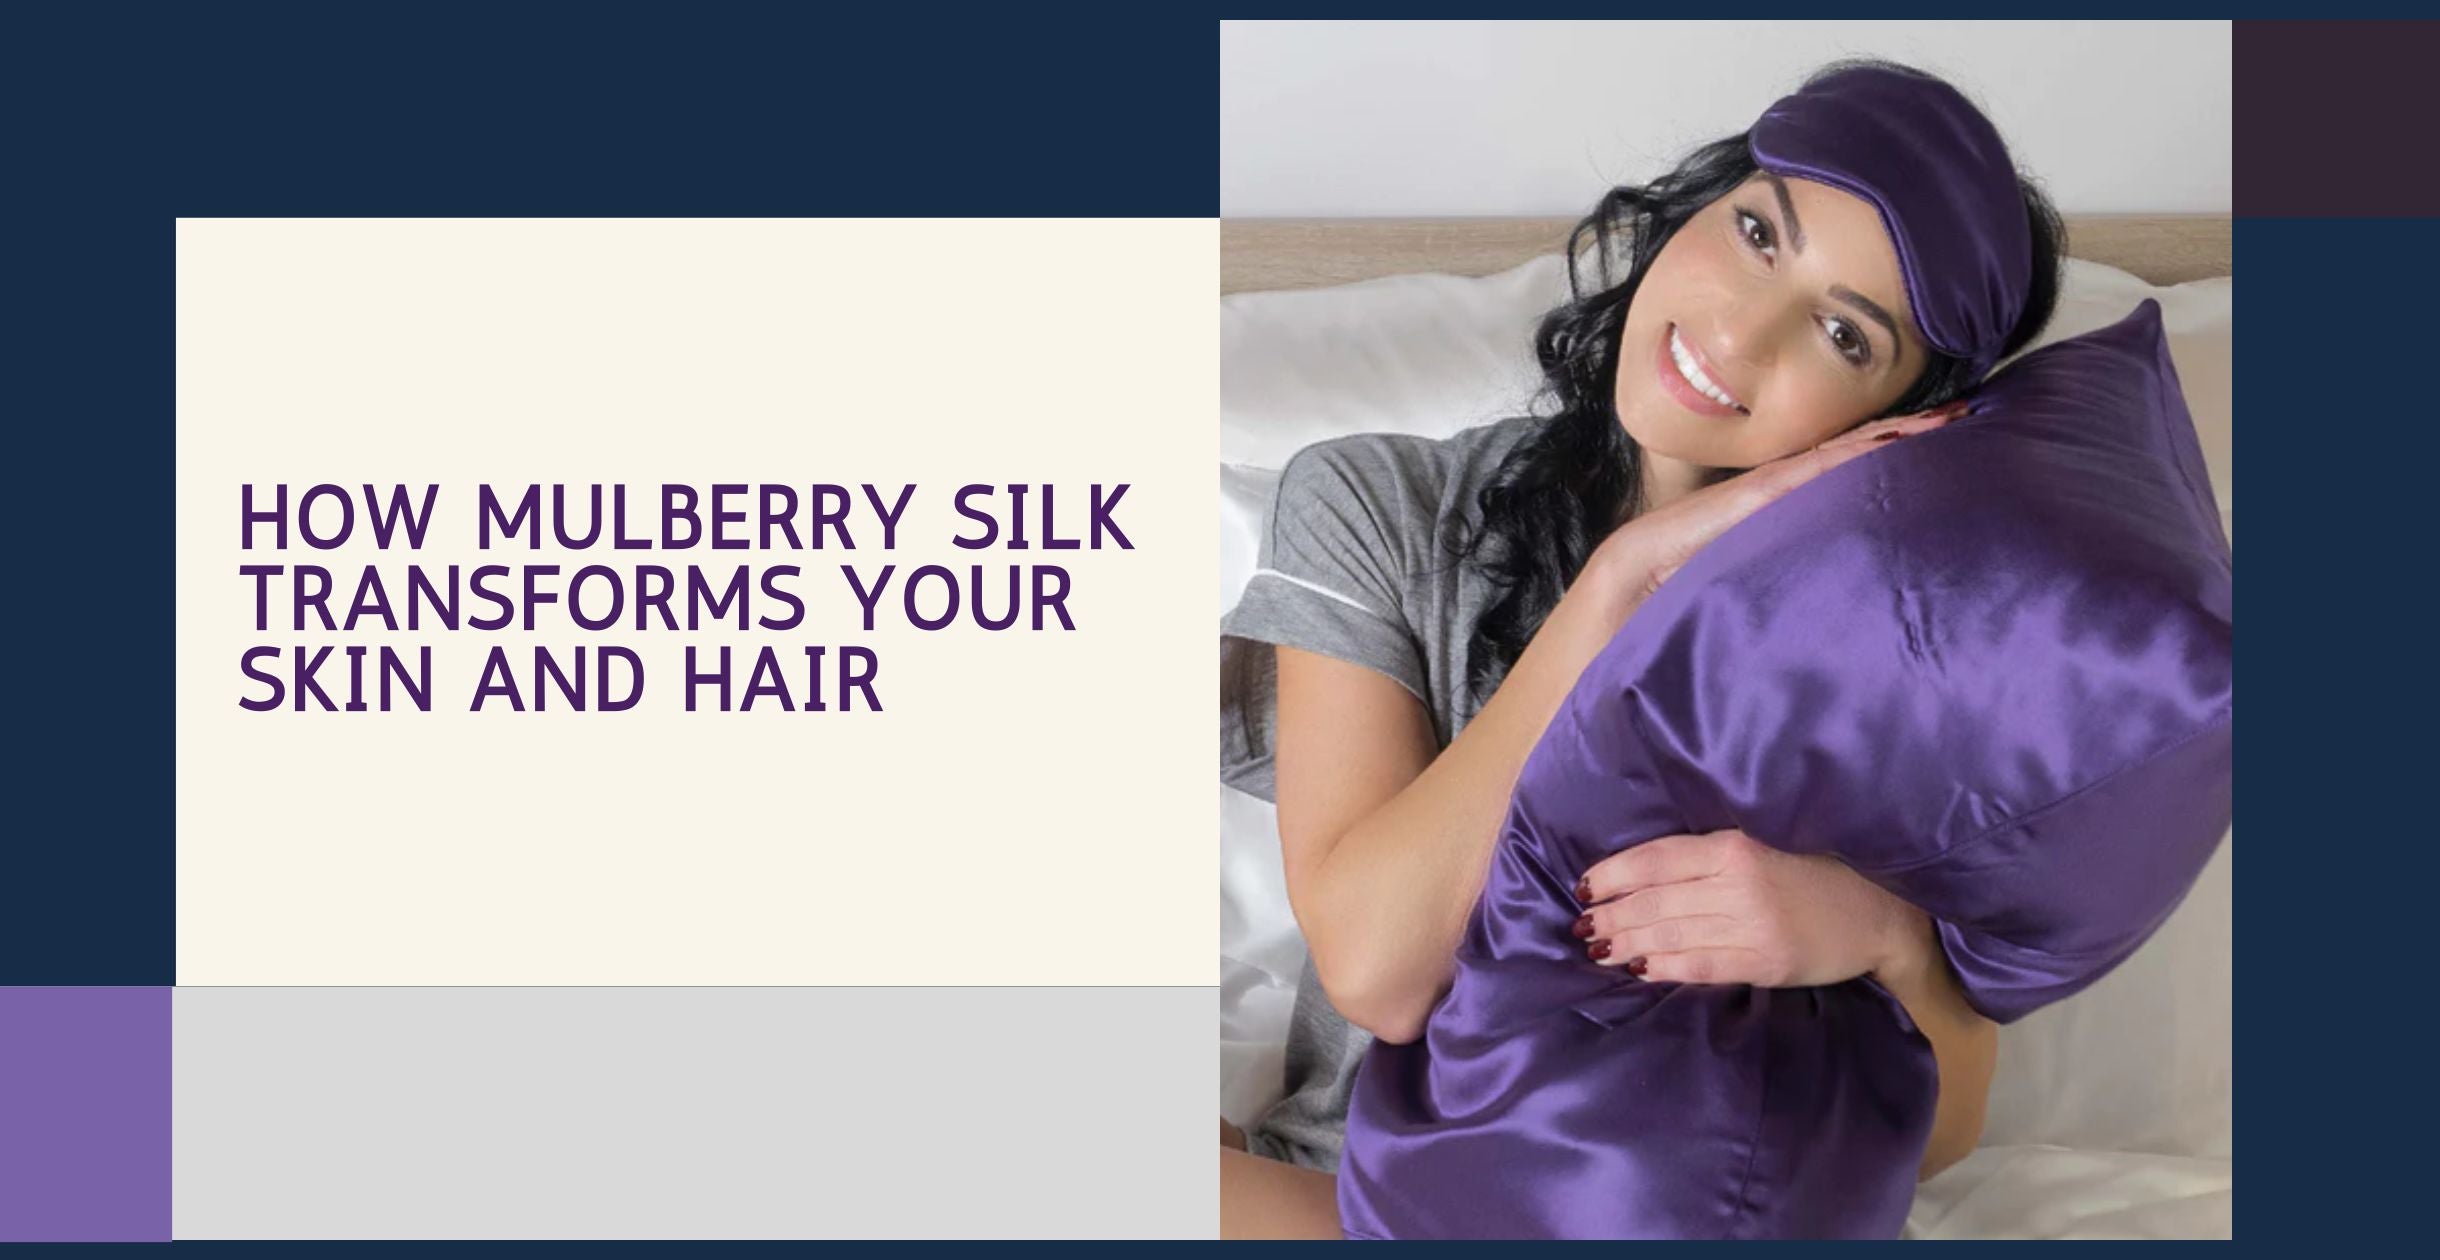 How Mulberry Silk Transforms Your Skin and Hair